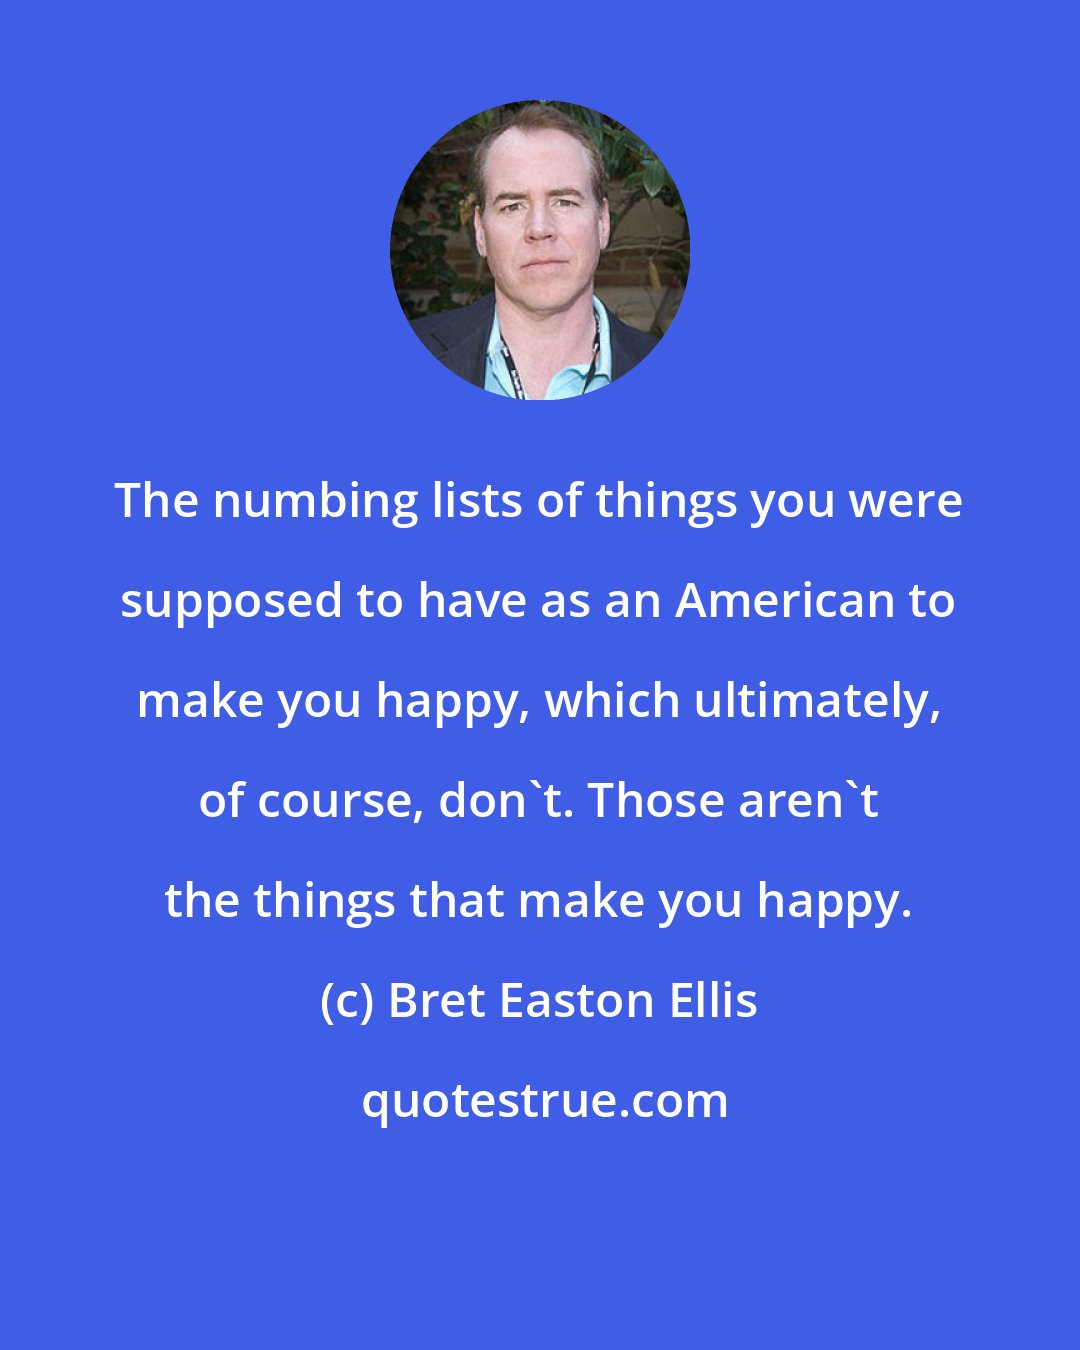 Bret Easton Ellis: The numbing lists of things you were supposed to have as an American to make you happy, which ultimately, of course, don't. Those aren't the things that make you happy.